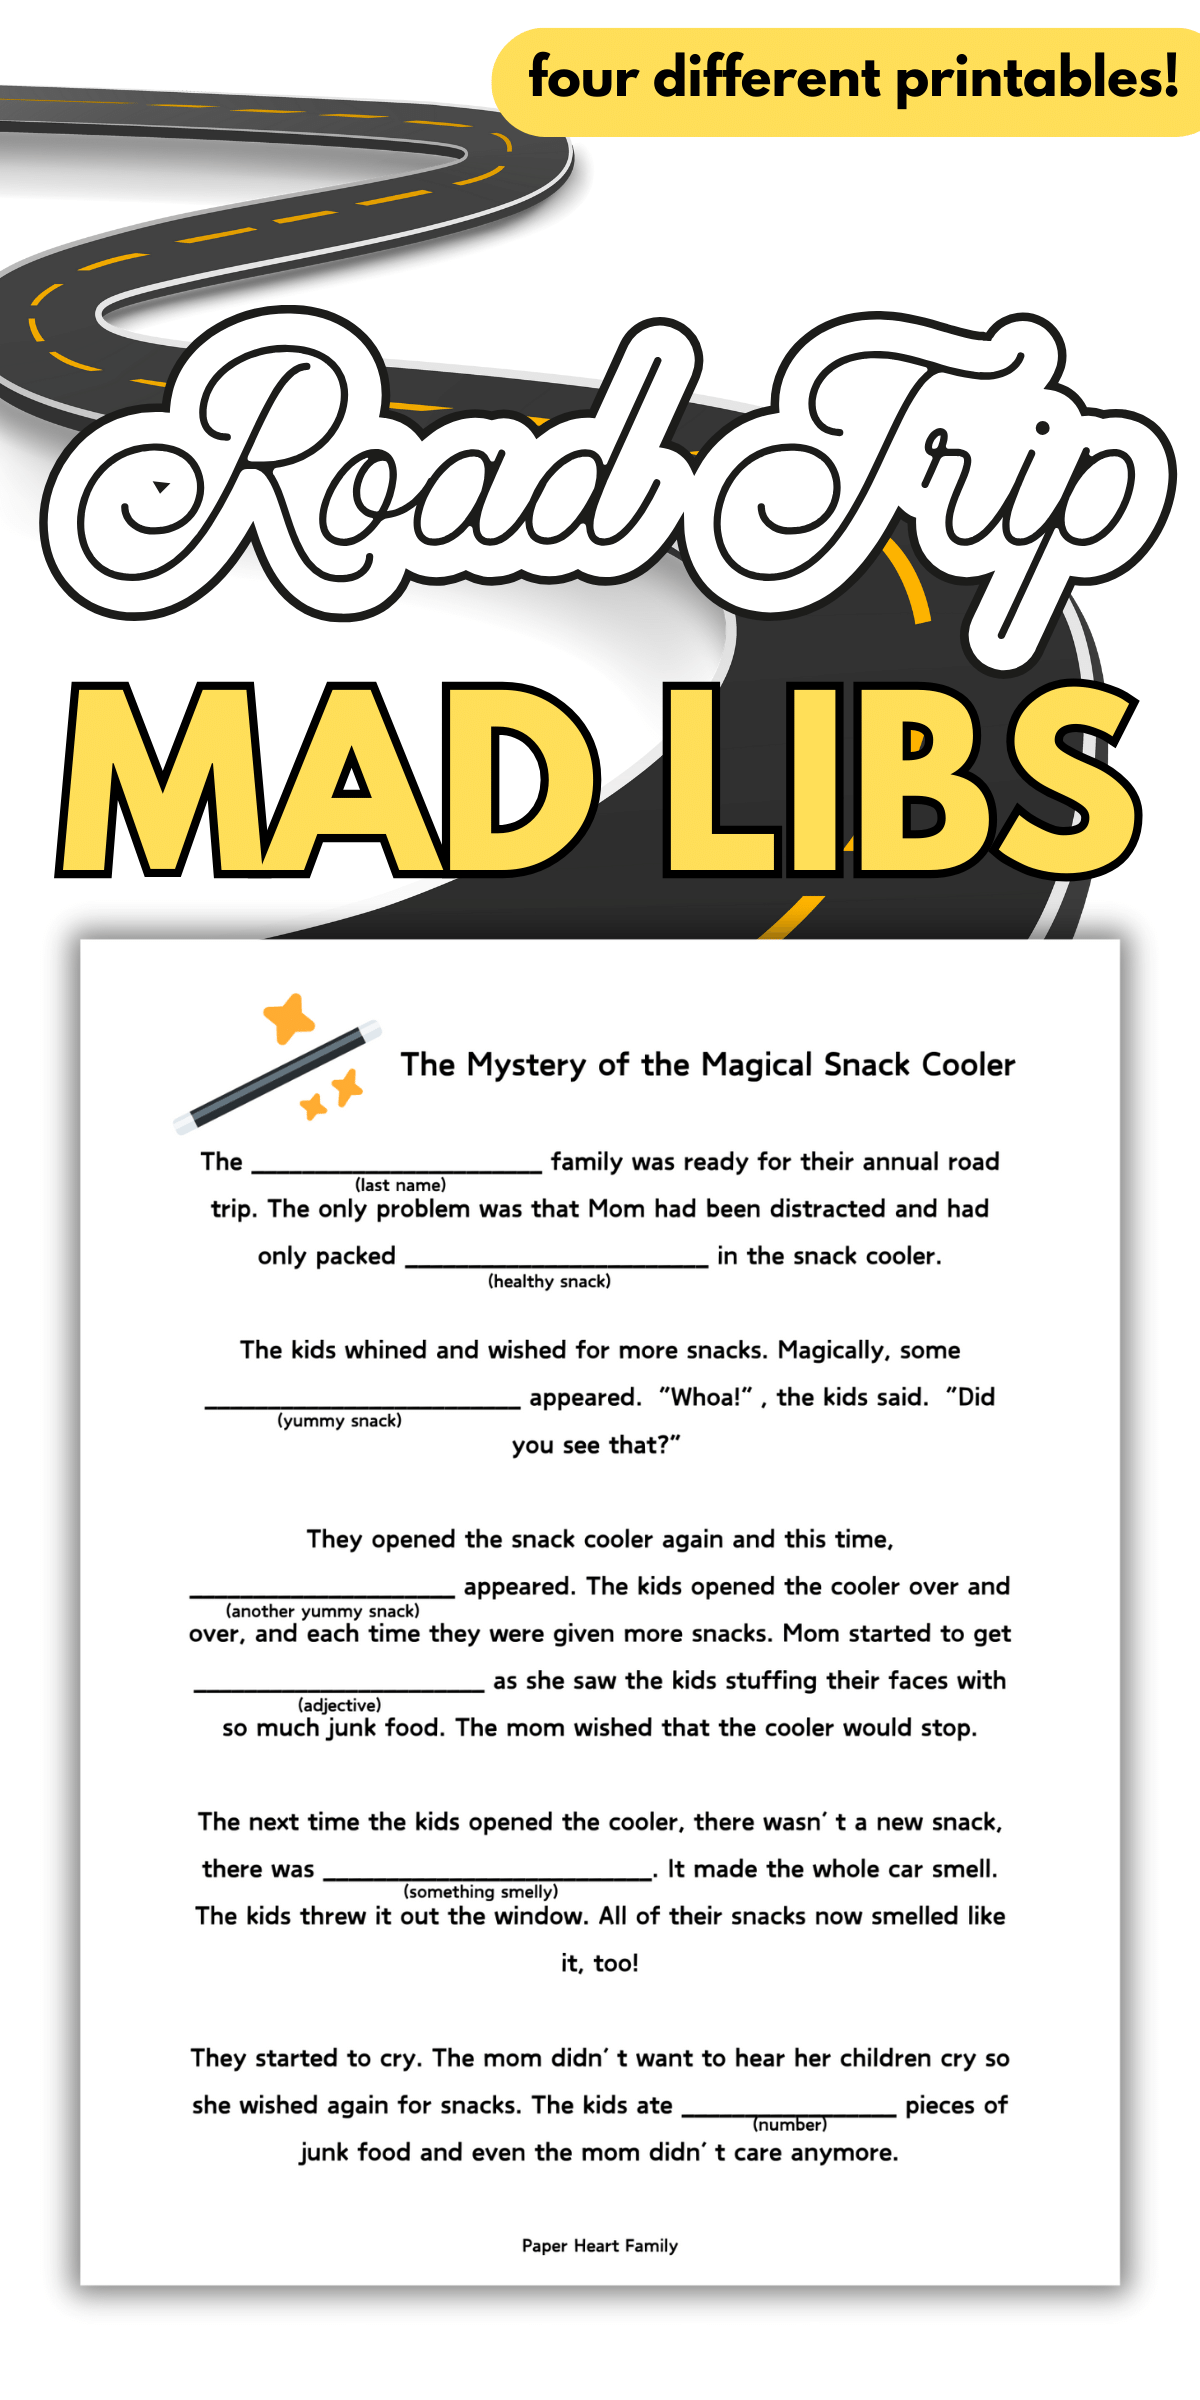 Picture of "The Mystery Of The Magical Snack Cooler" Mad Libs